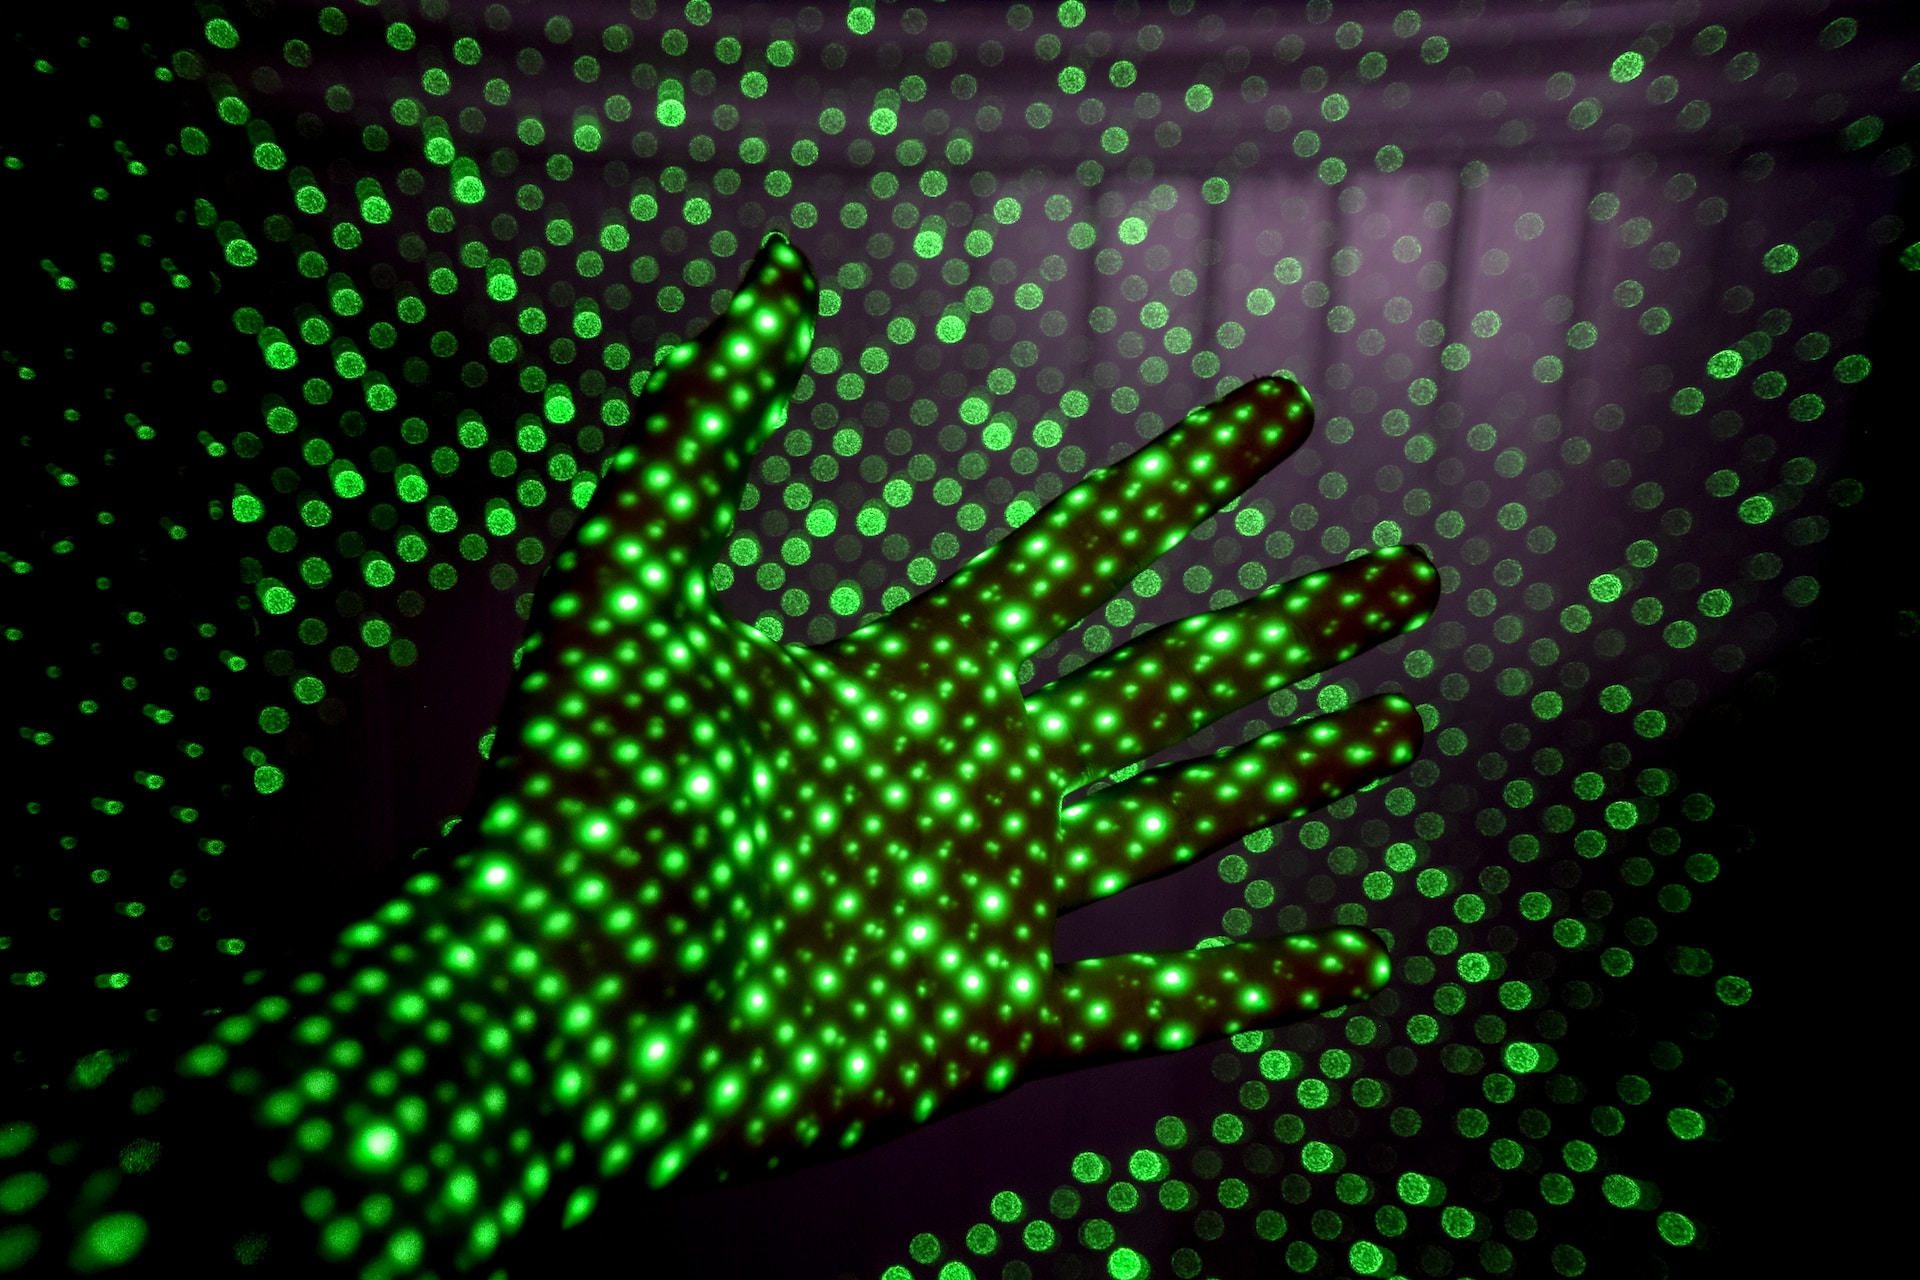 image of hand and projection of green dots | Atos